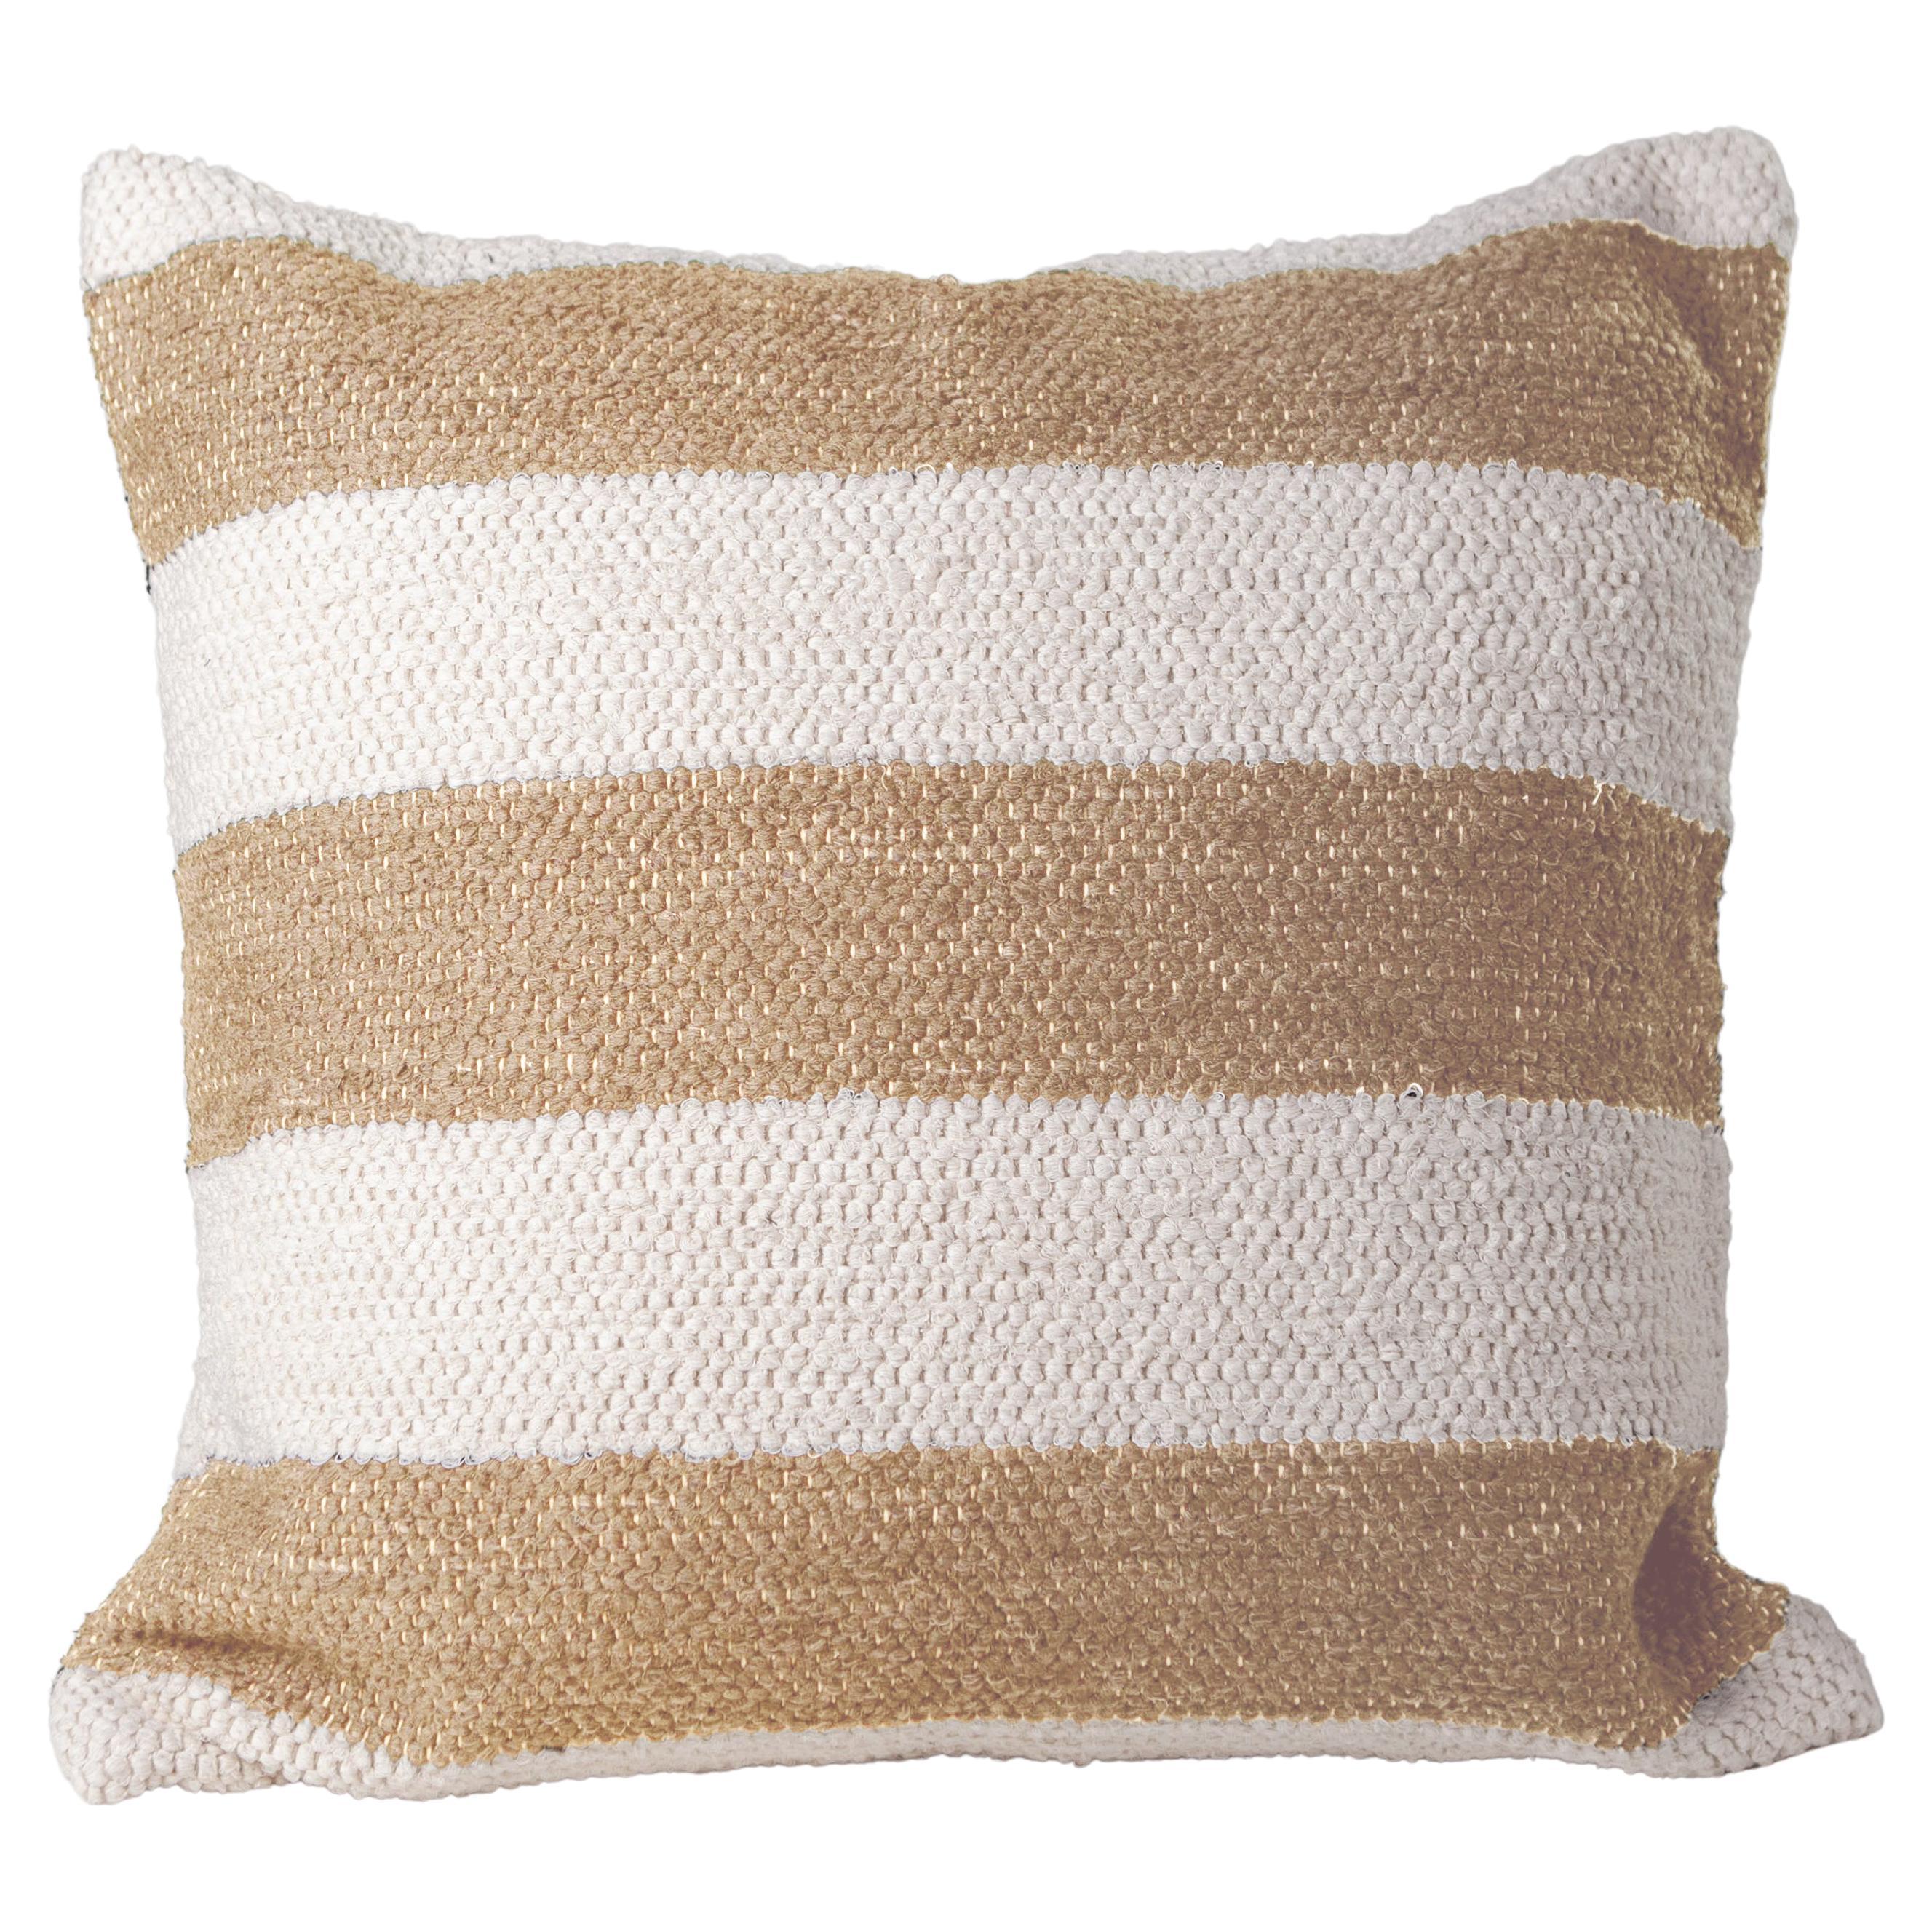 Handwoven Recycled Cotton Camel Bold Stripe Throw Pillow, in Stock